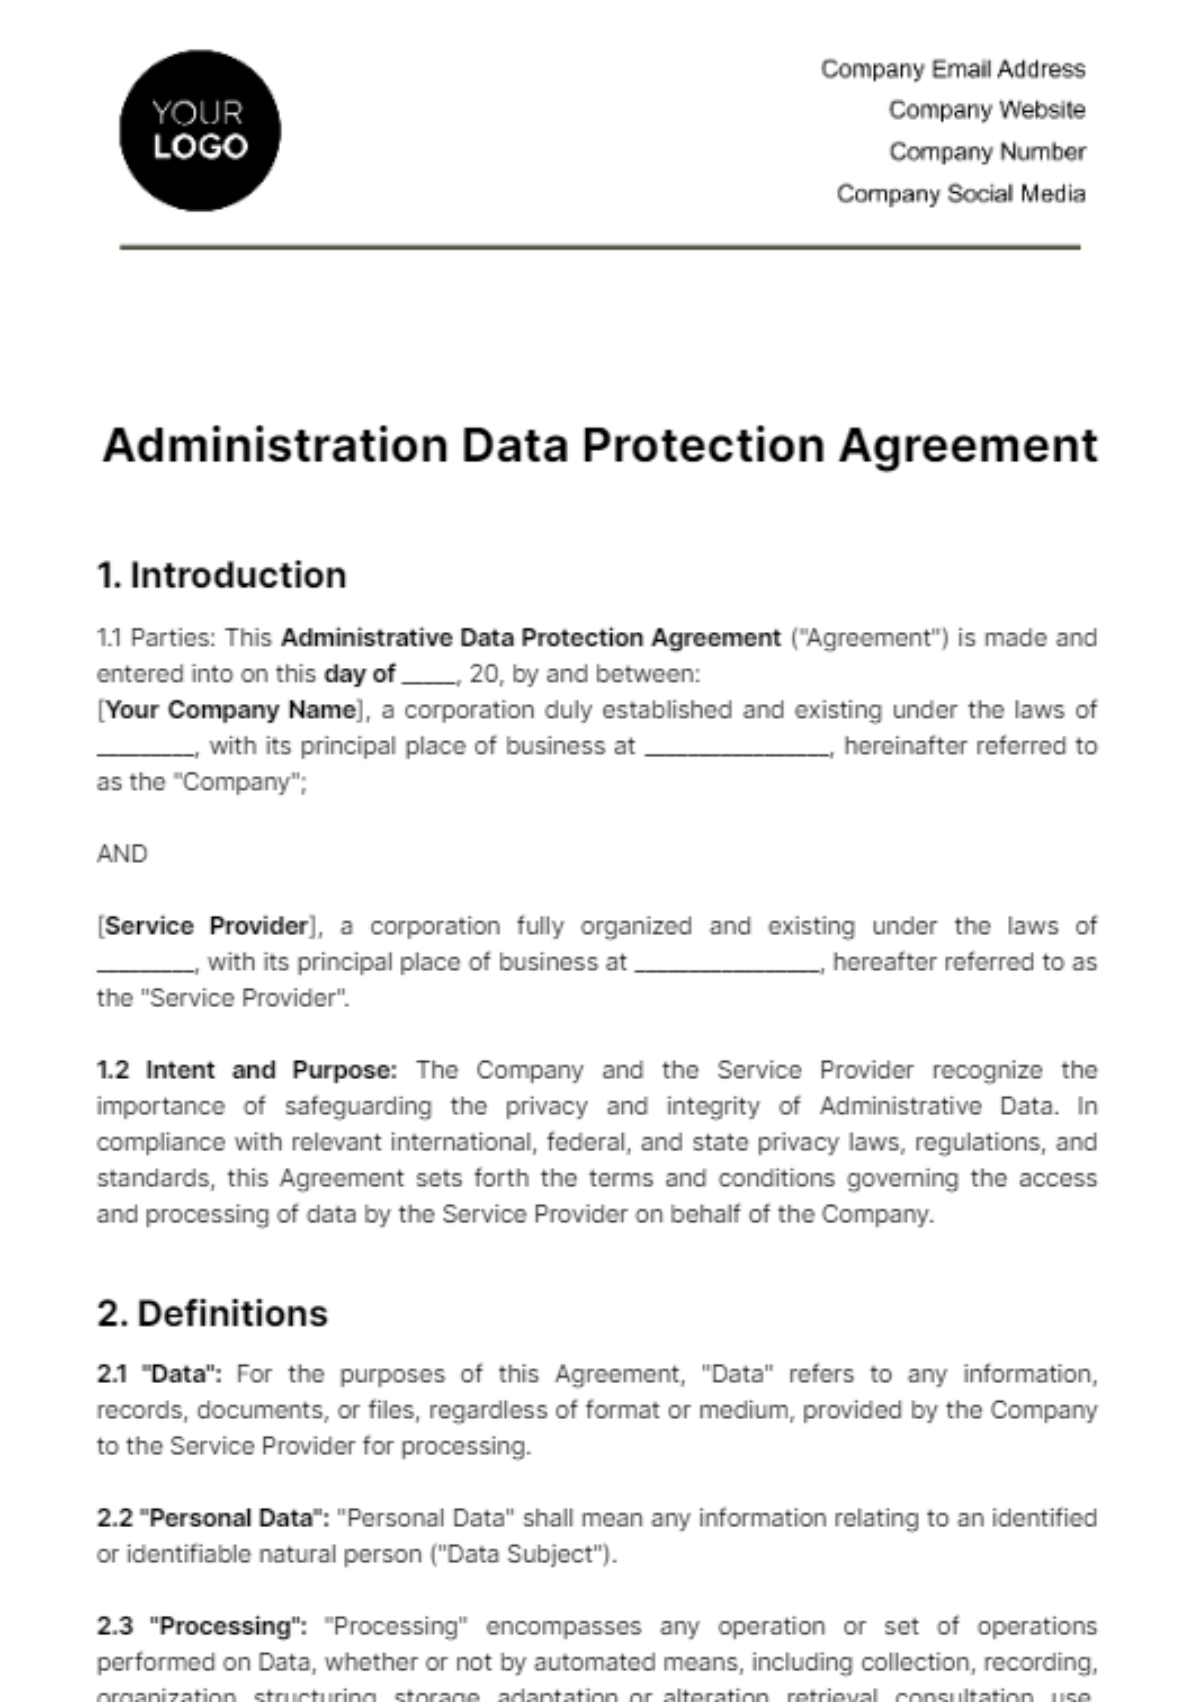 Administration Data Protection Agreement Template